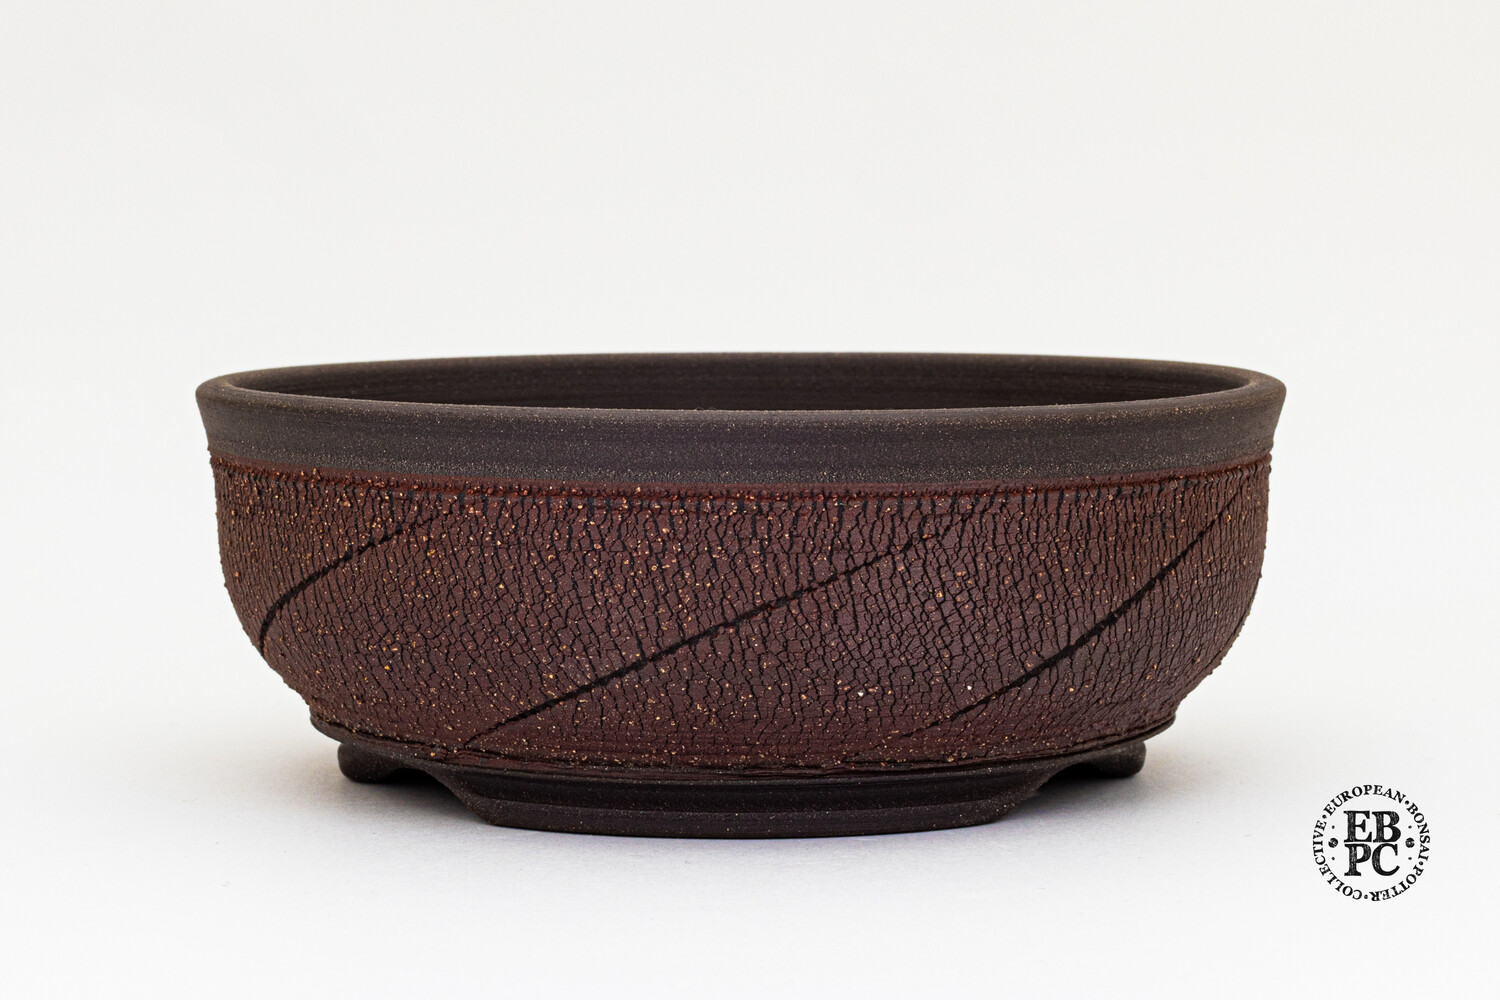 Yaruki Ceramics - Rome. 15.5cm; Round; Rustic Design; Unglazed; Weathered and Crackled Texture; Reddish Brown Slip; Dual Stamped; Made by Giuseppe Lombardo. EBPC DIRECT (Sent from within EU)